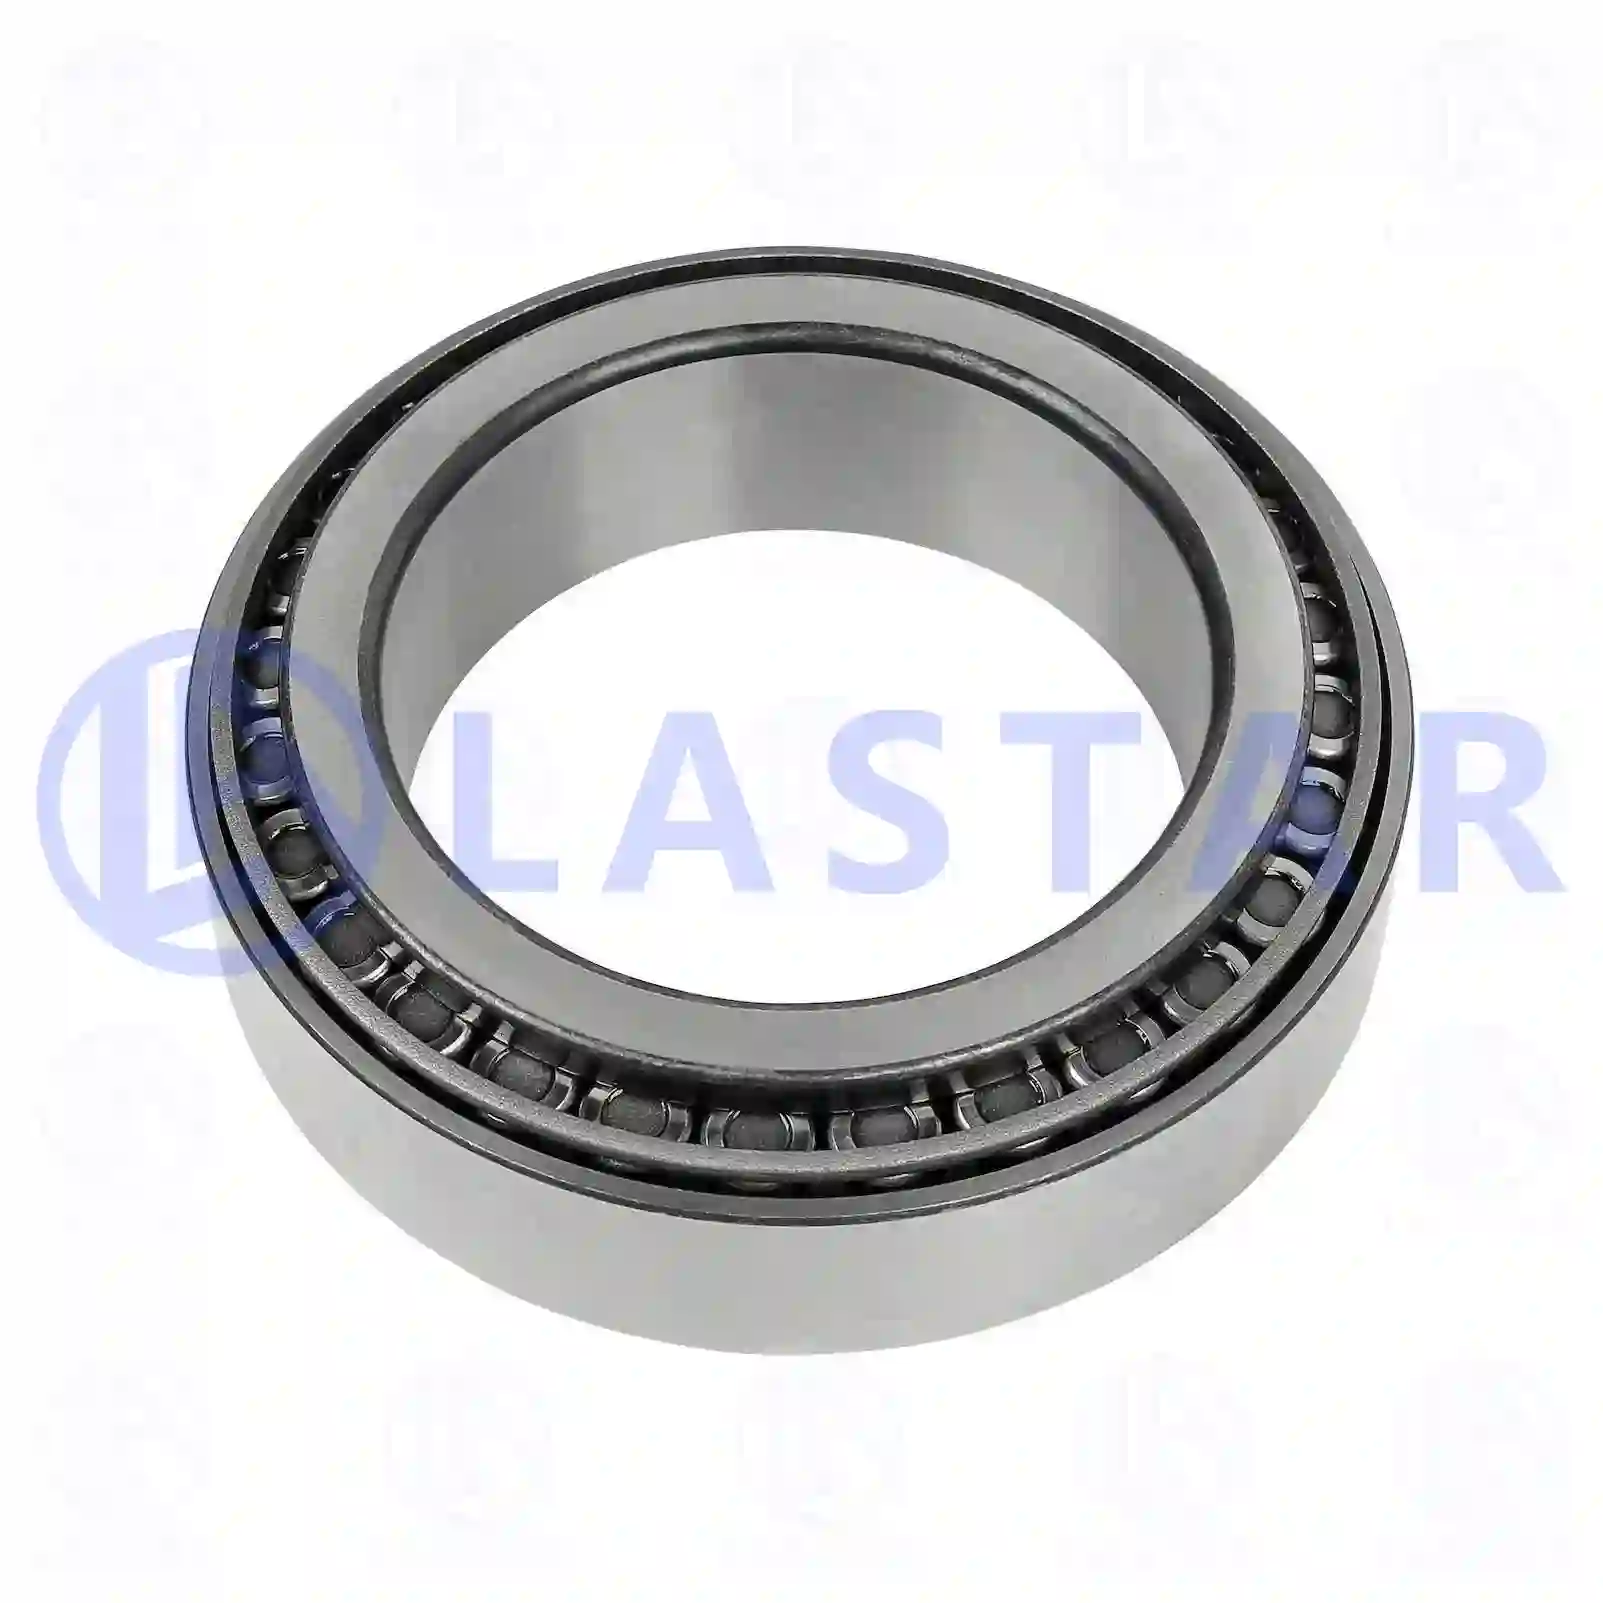 Bearings Tapered roller bearing, la no: 77724657 ,  oem no:0676988, 1616867, 676988, 01905027, 06324990124, 06324990125, 81934200304, 0019806602, 0059818405, 0059818505, 0069810105, 0149813205, 017063, ZG03024-0008 Lastar Spare Part | Truck Spare Parts, Auotomotive Spare Parts